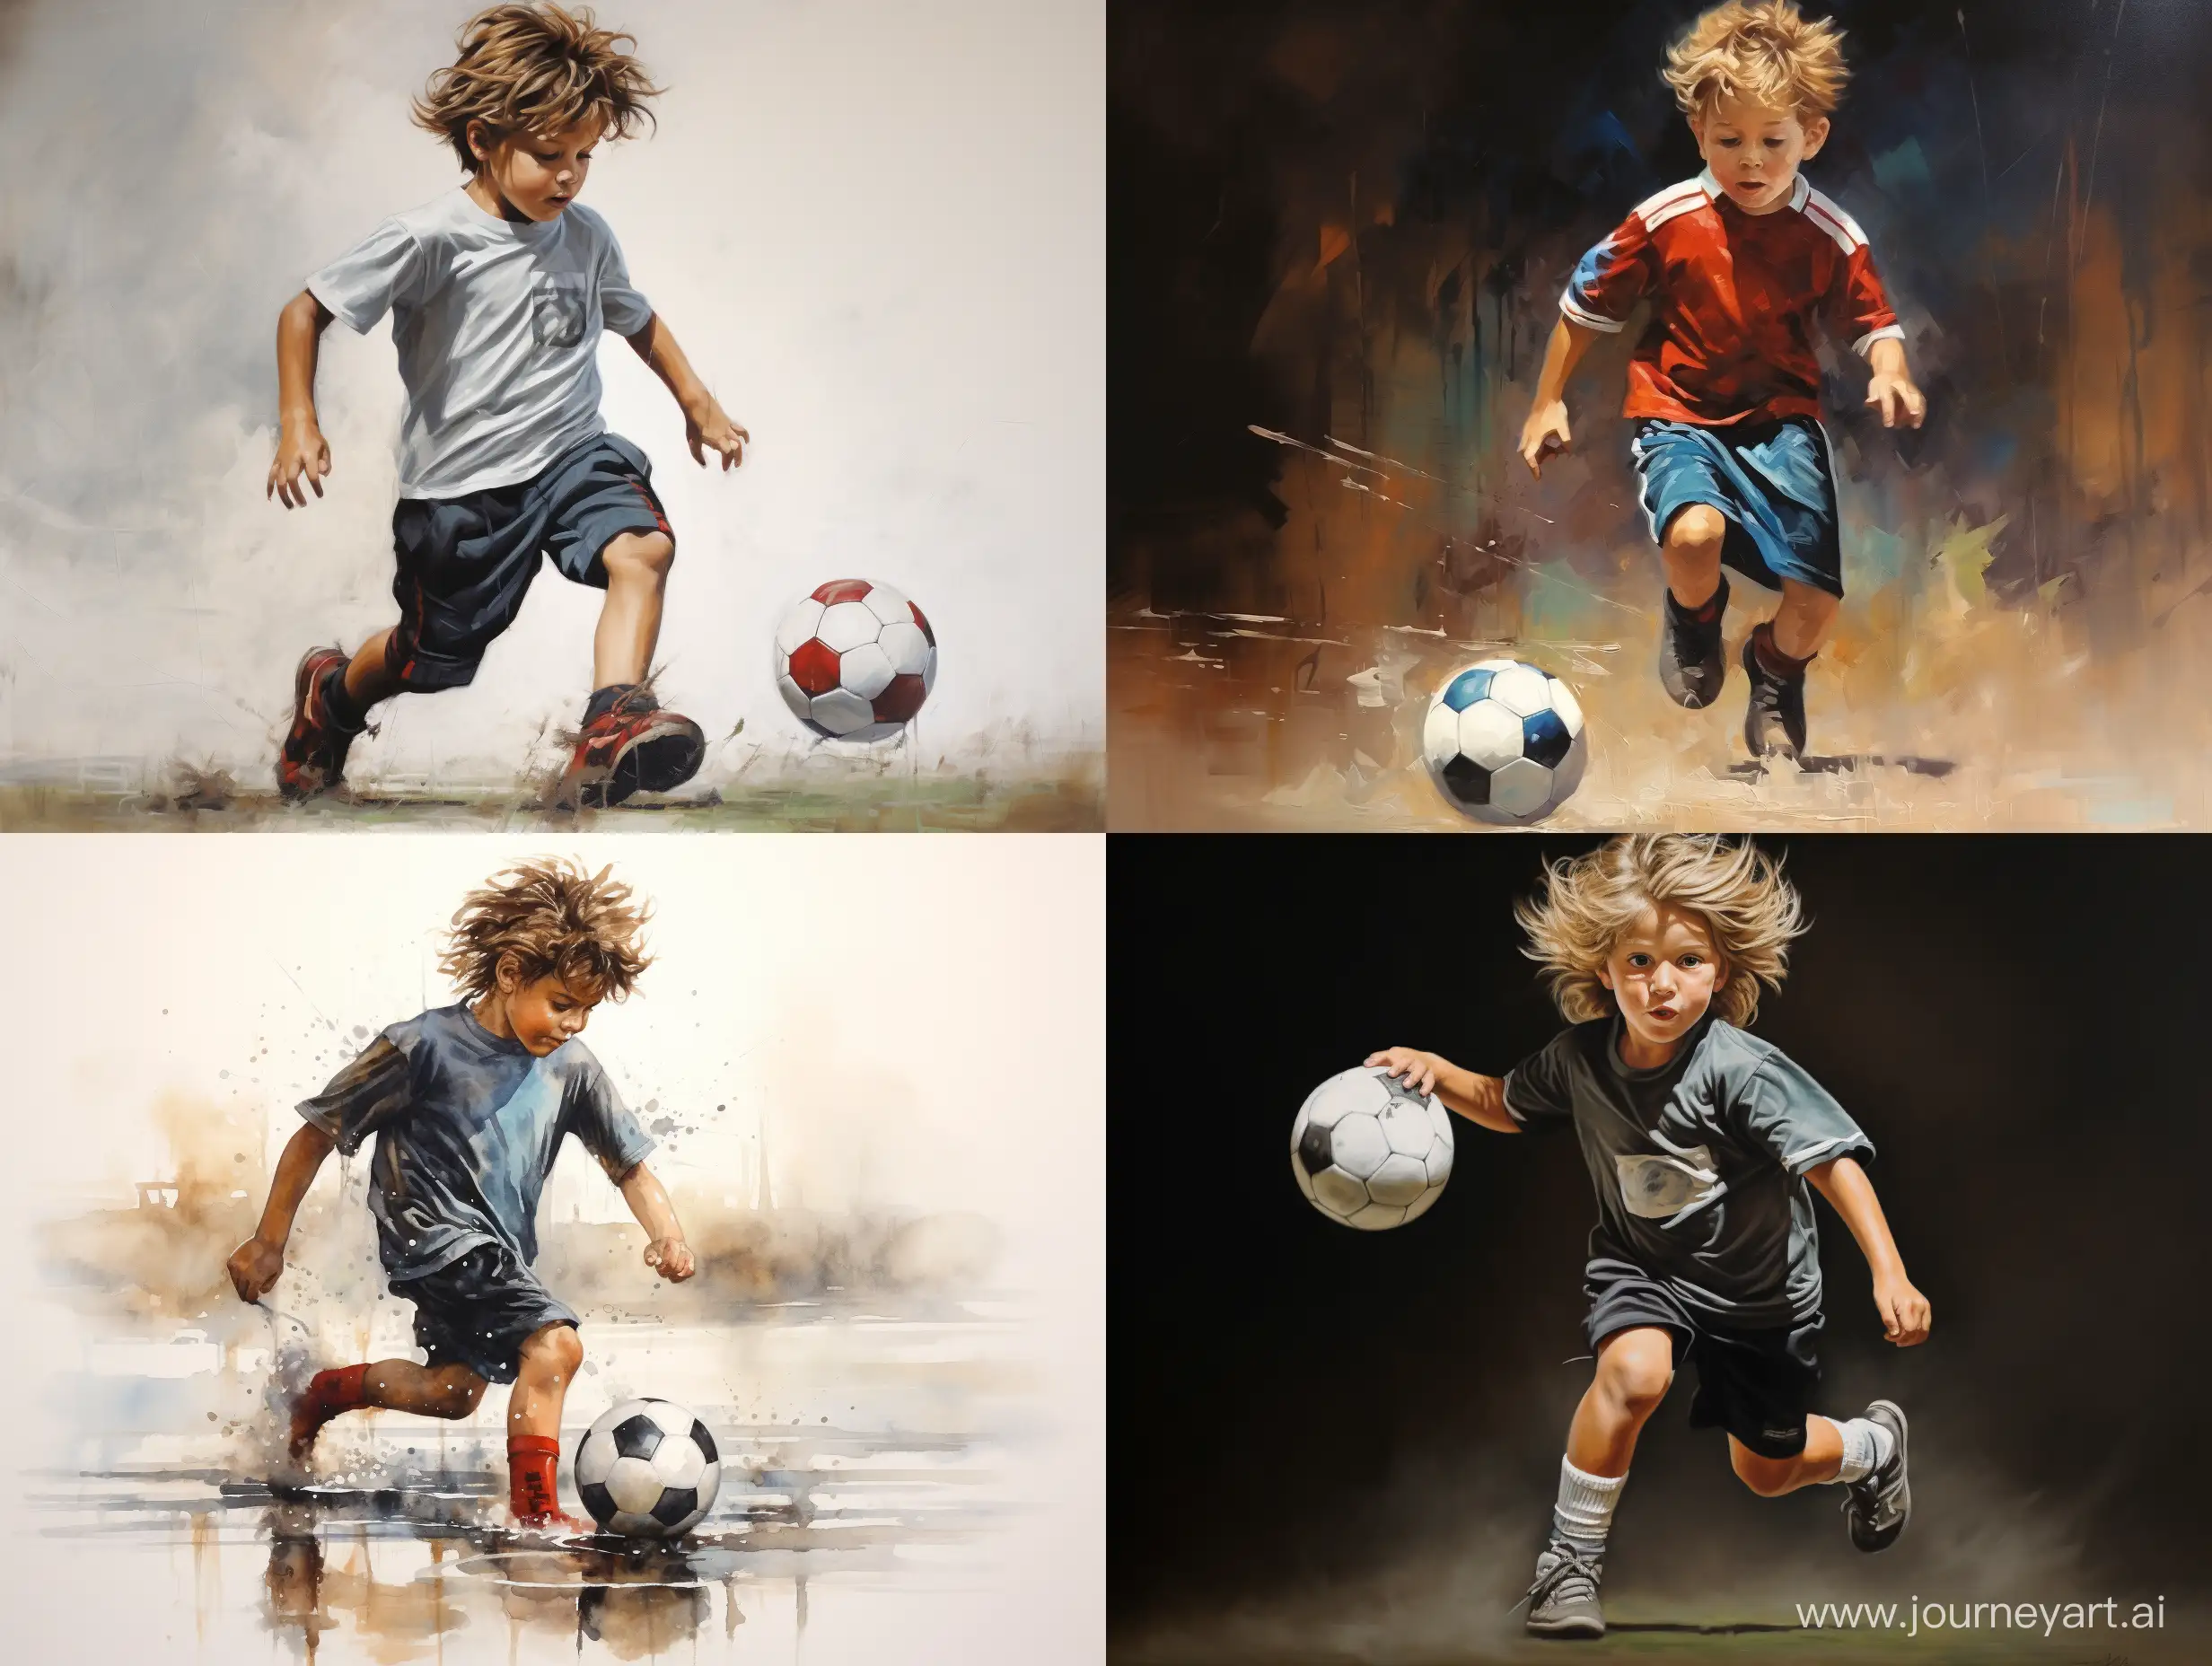 Energetic-Youth-Playing-Soccer-Dynamic-Action-Shot